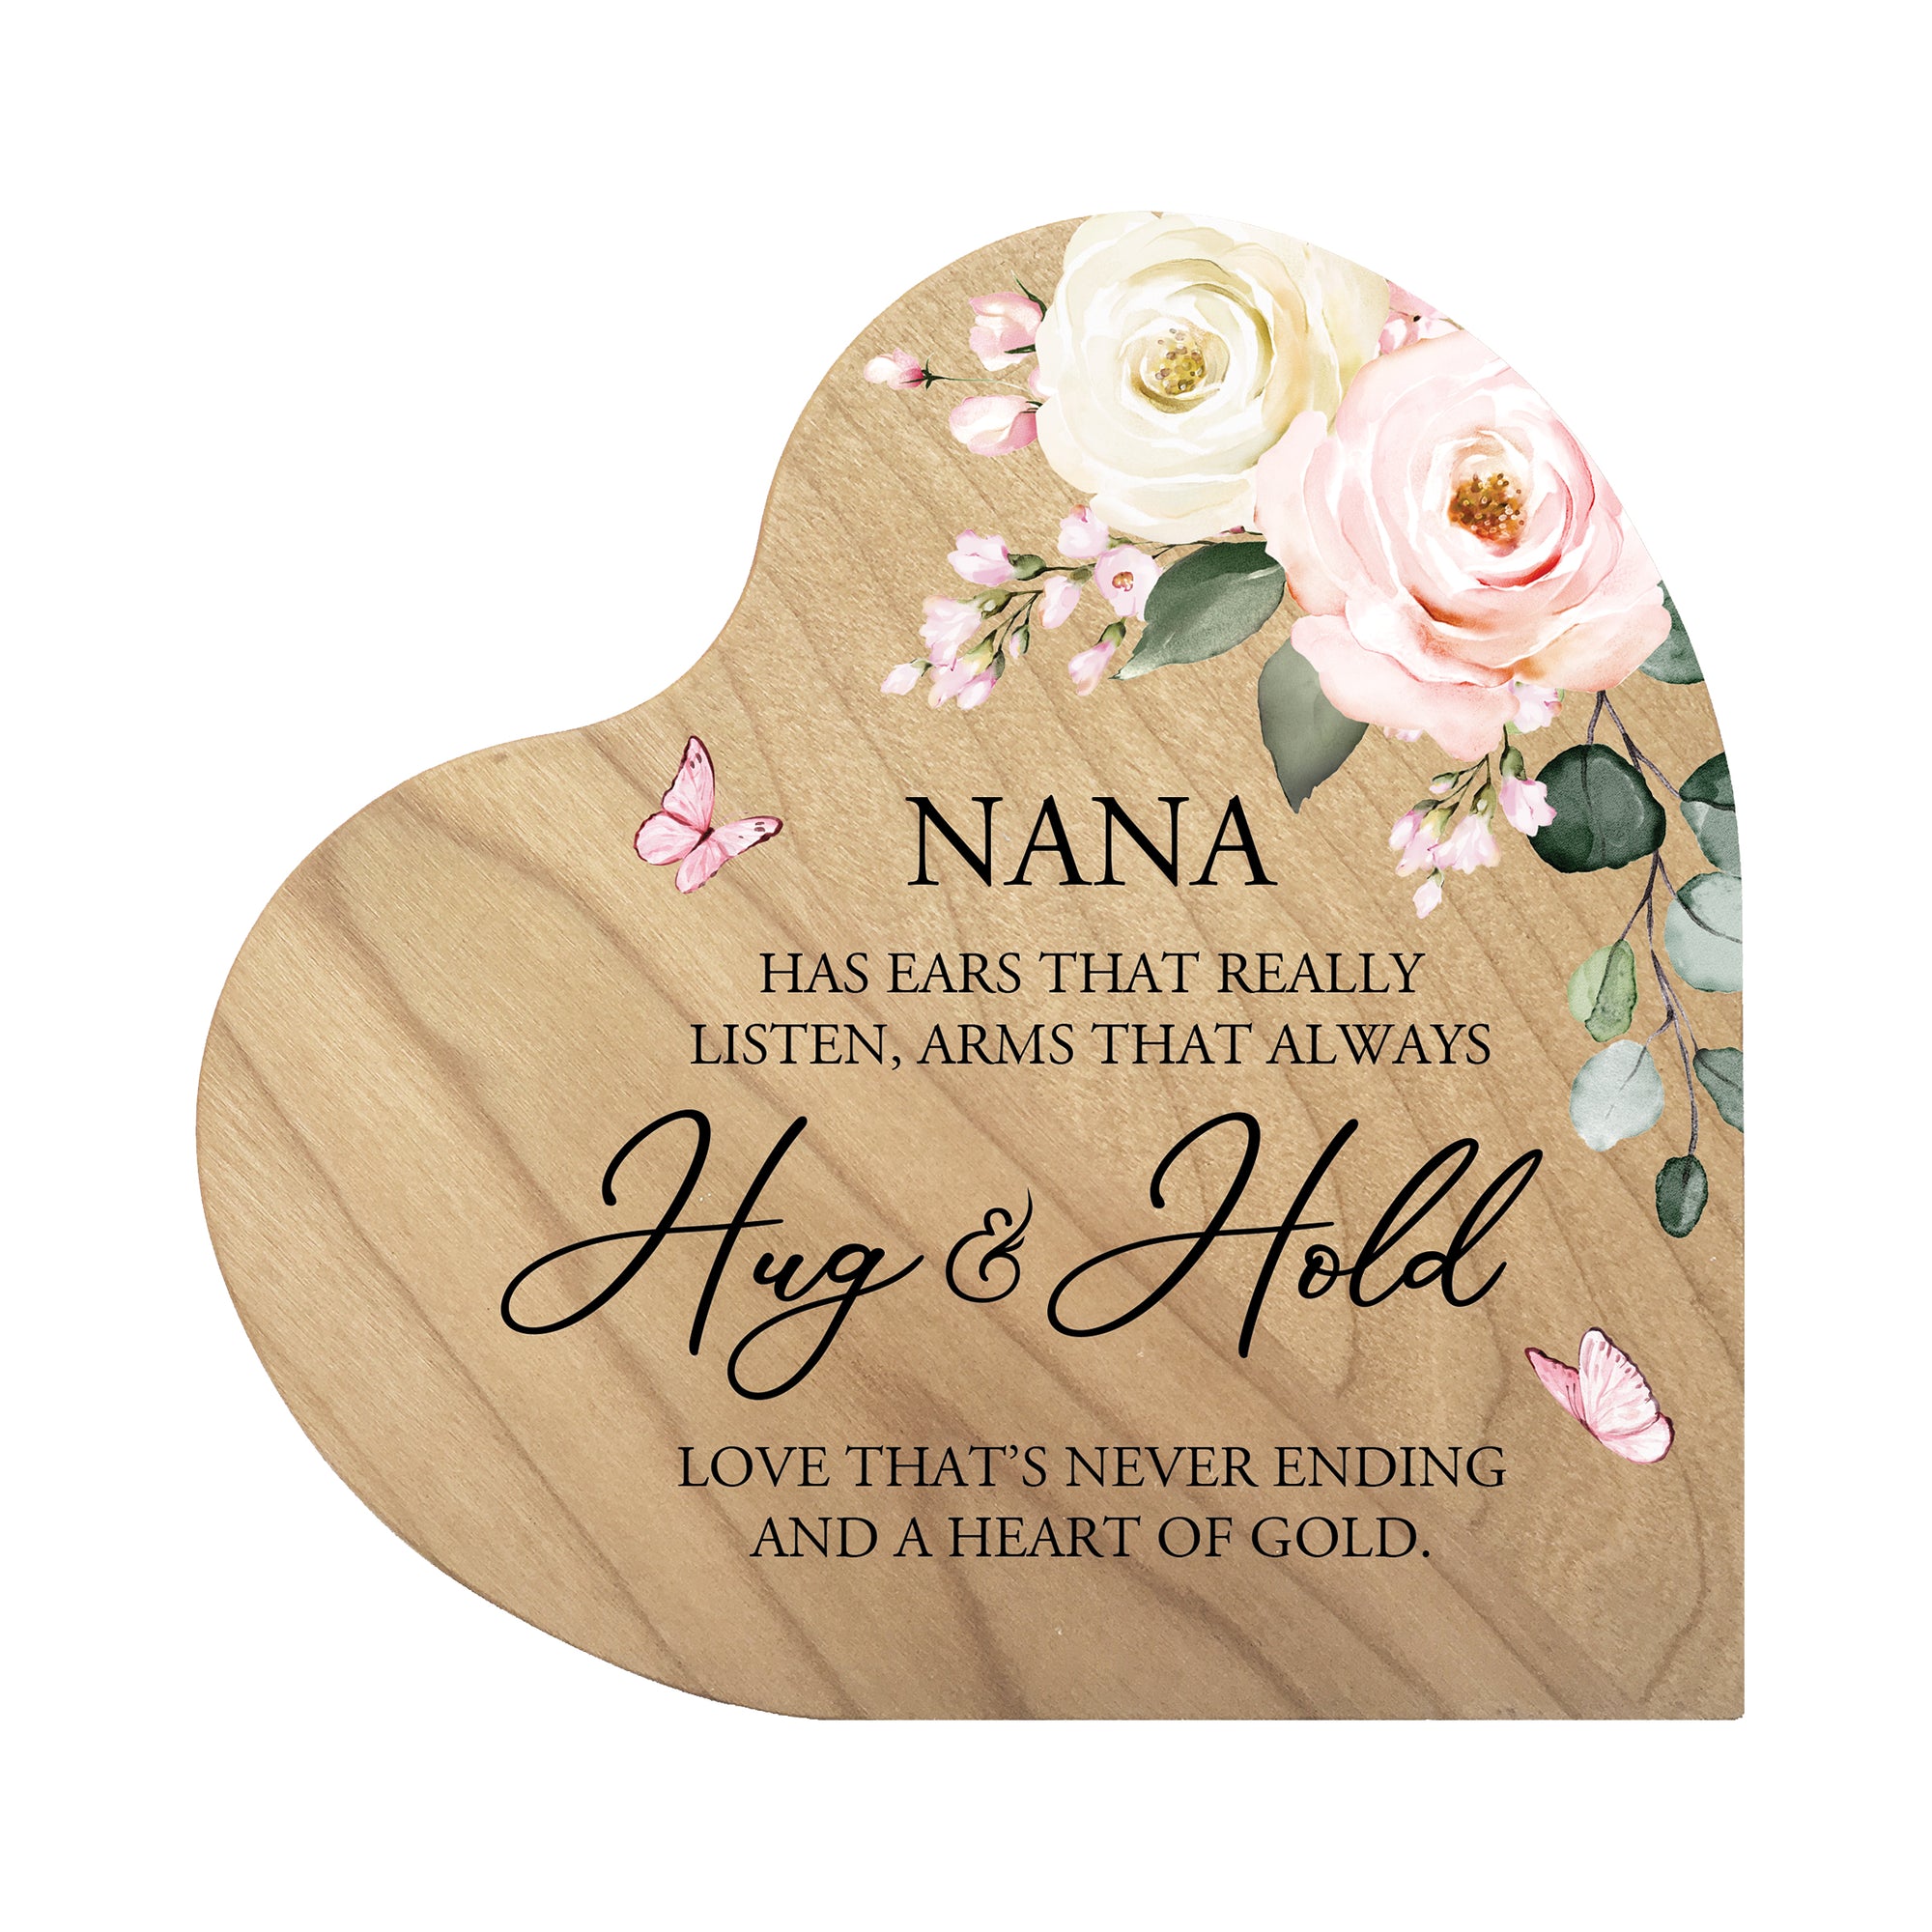 Lifesong Milestones Unique Grandmother’s Love Heart Block- 5in with Inspirational verse - Nana, Hug and Hold. A housewarming keepsake gift to a beloved family member or friend